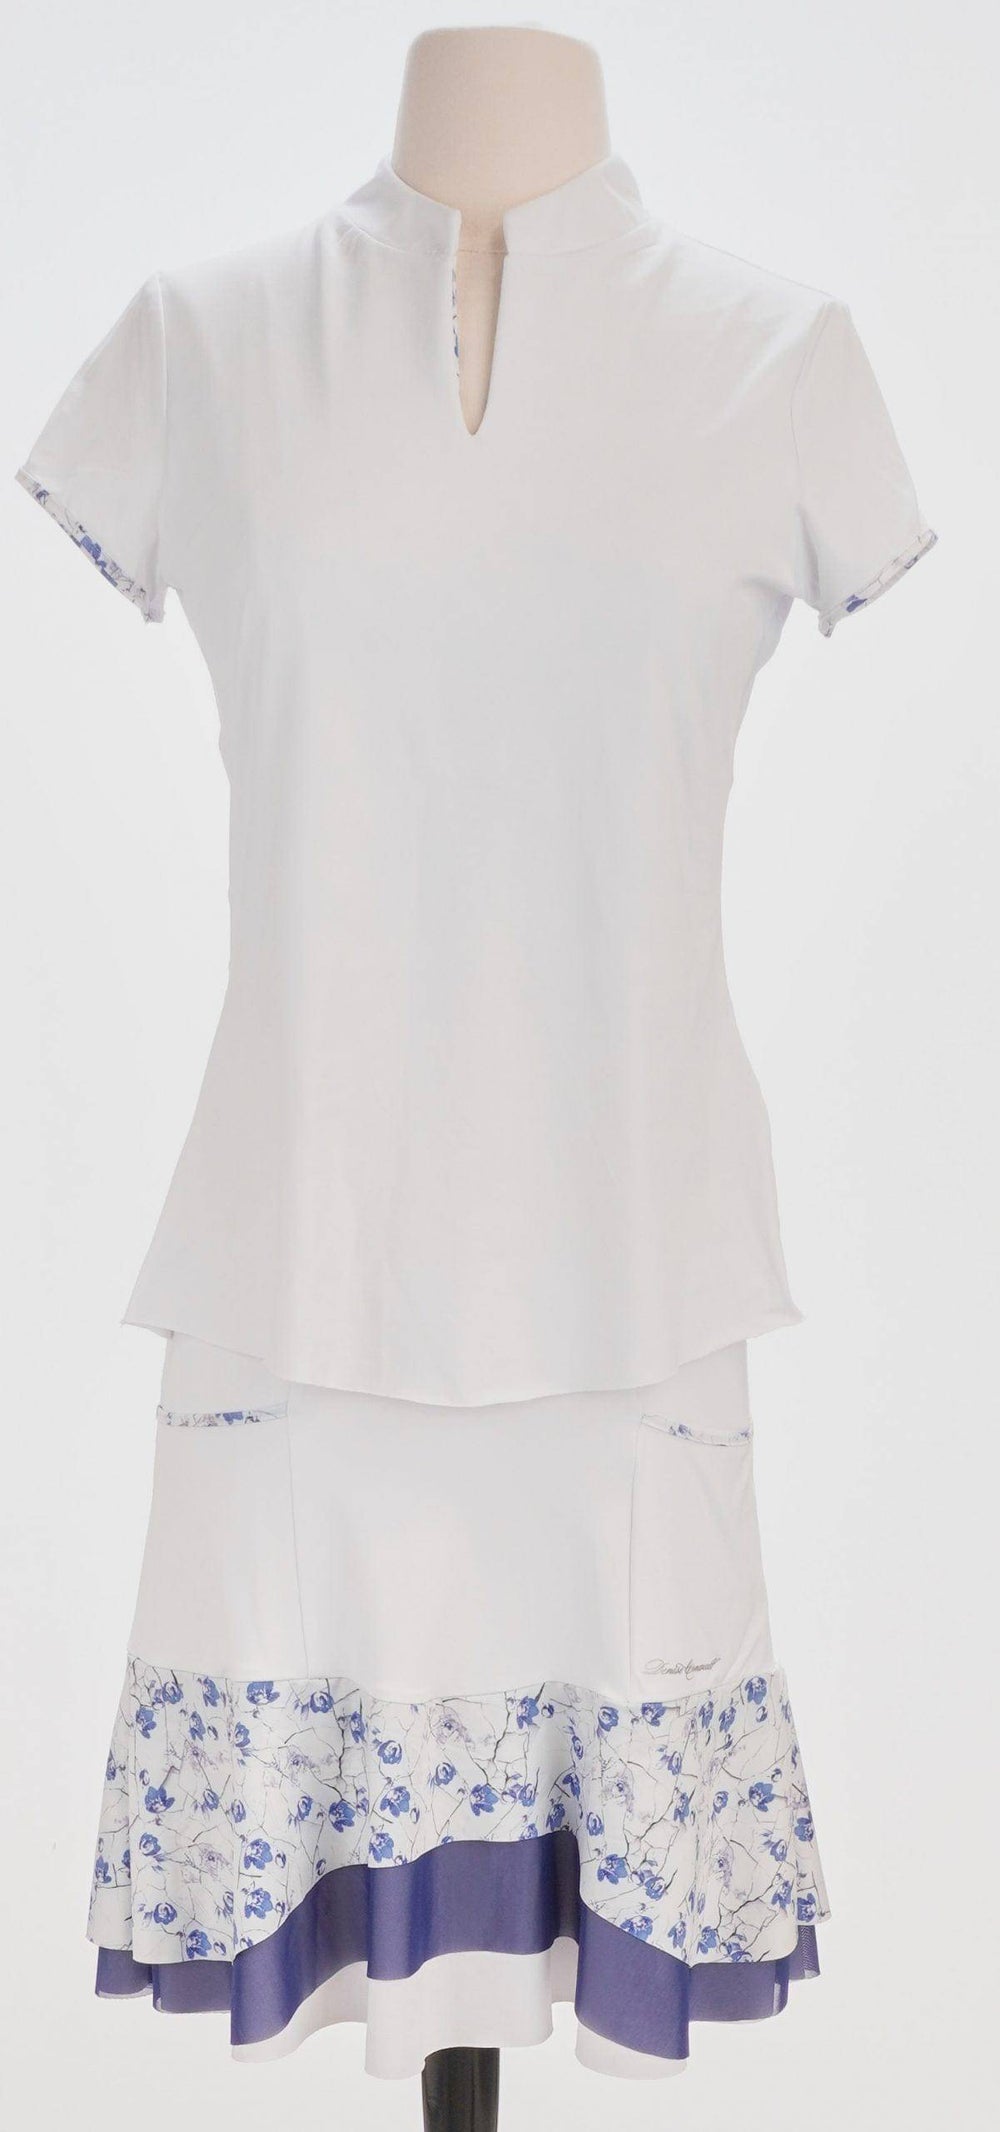 Denise Cronwall White / X-Small / Consigned Denise Cronwell White Short Sleeve Golf Top Size XS